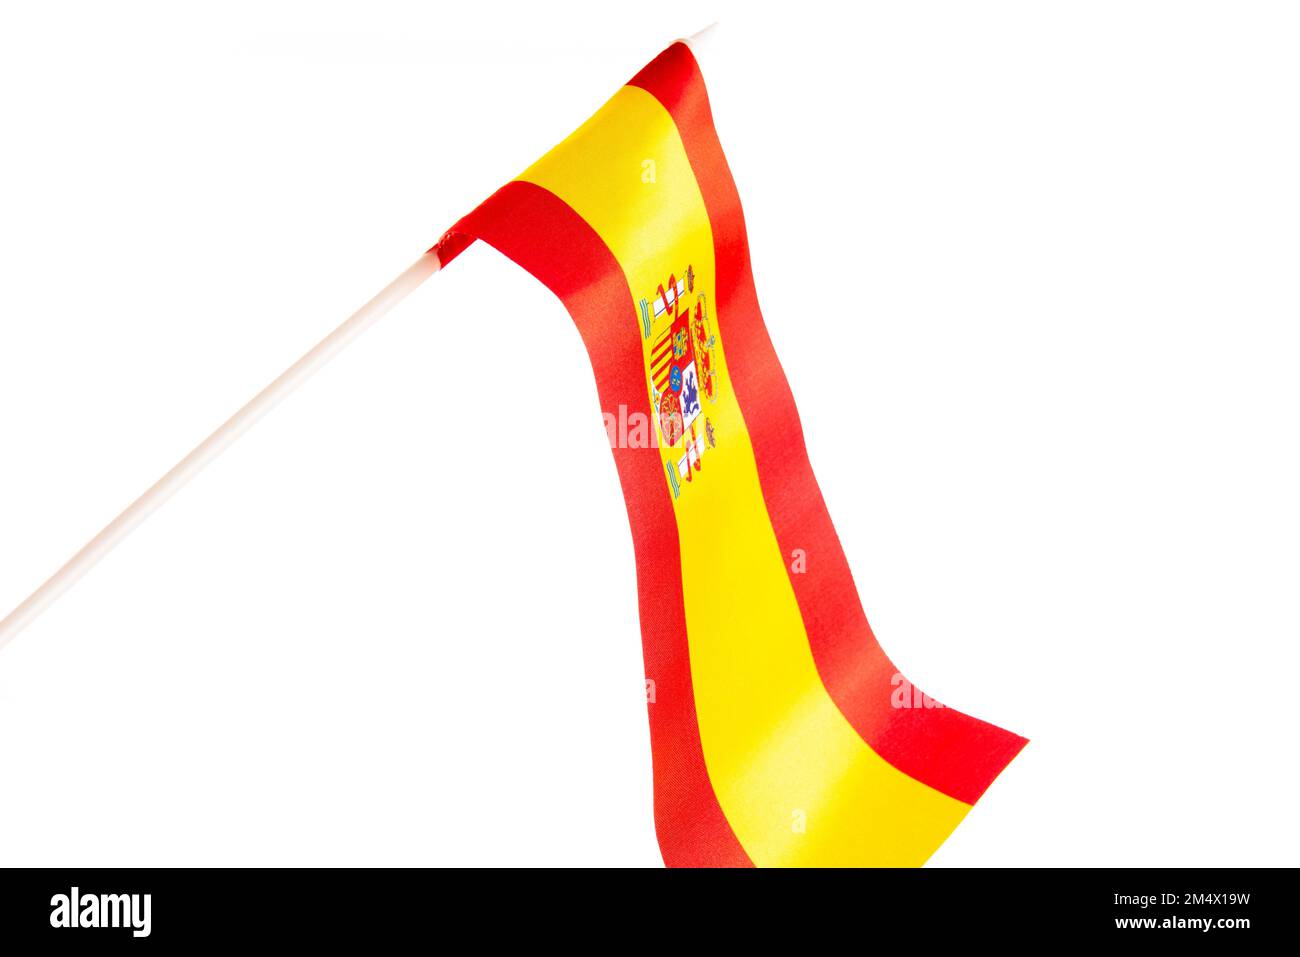 The Spanish flag on a black background developing and fluttering in the wind. Isolate. Stock Photo